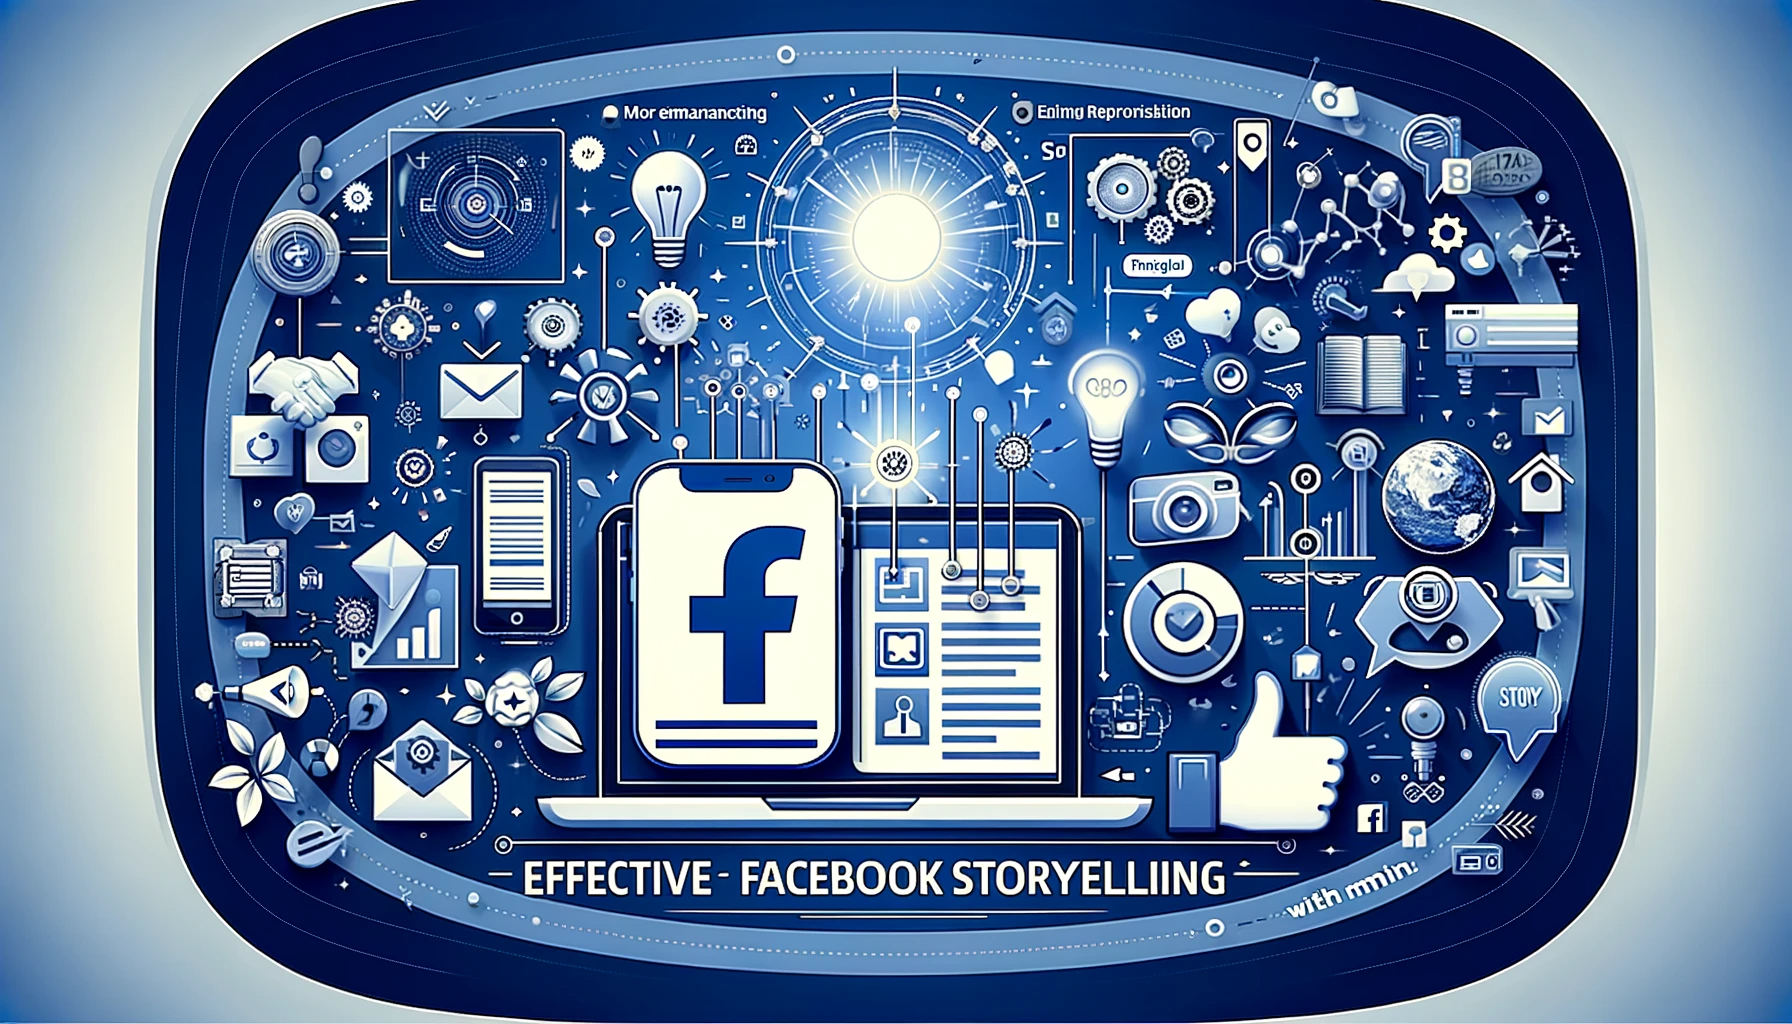 Effective Facebook Storytelling with Rank Panel